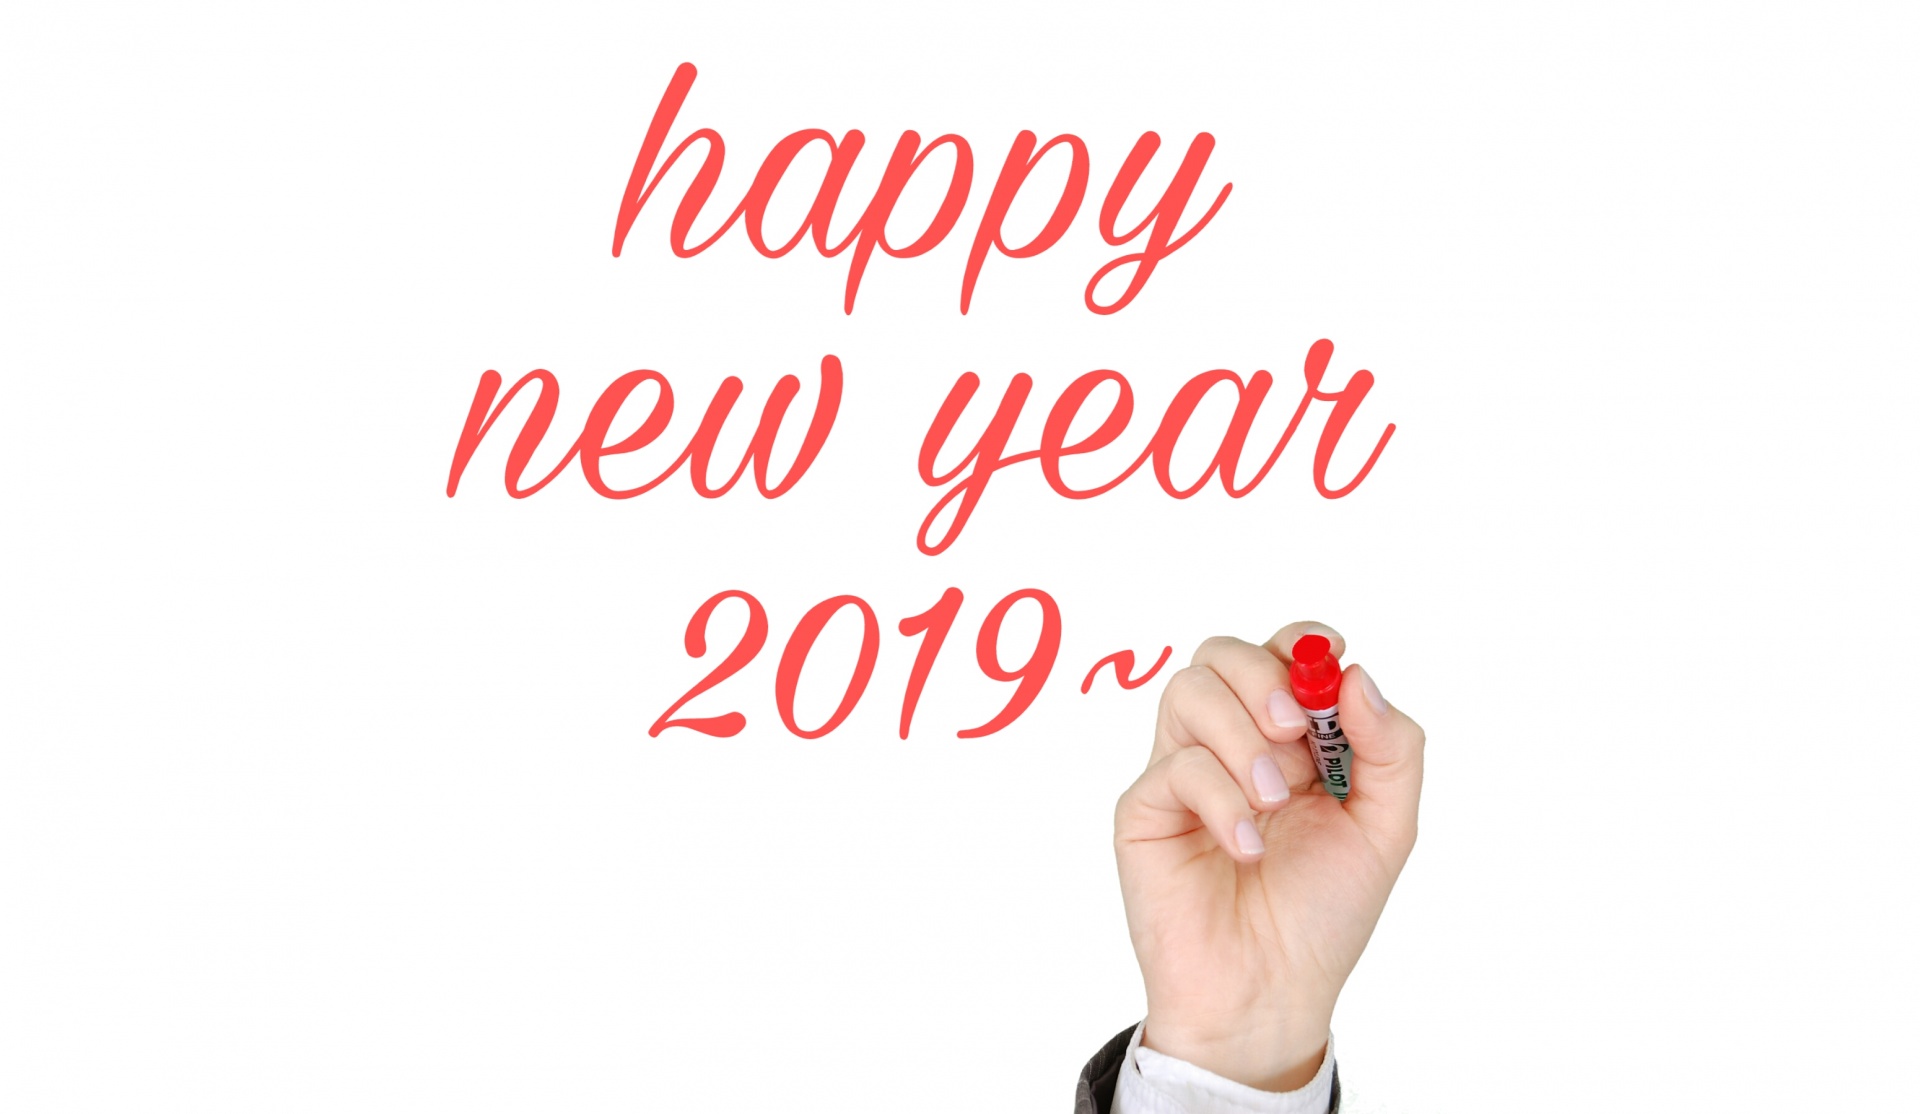 new year, happy new year, 2019, greeting, pen, marker, hand, the hand, to write, business, on a white background, white background